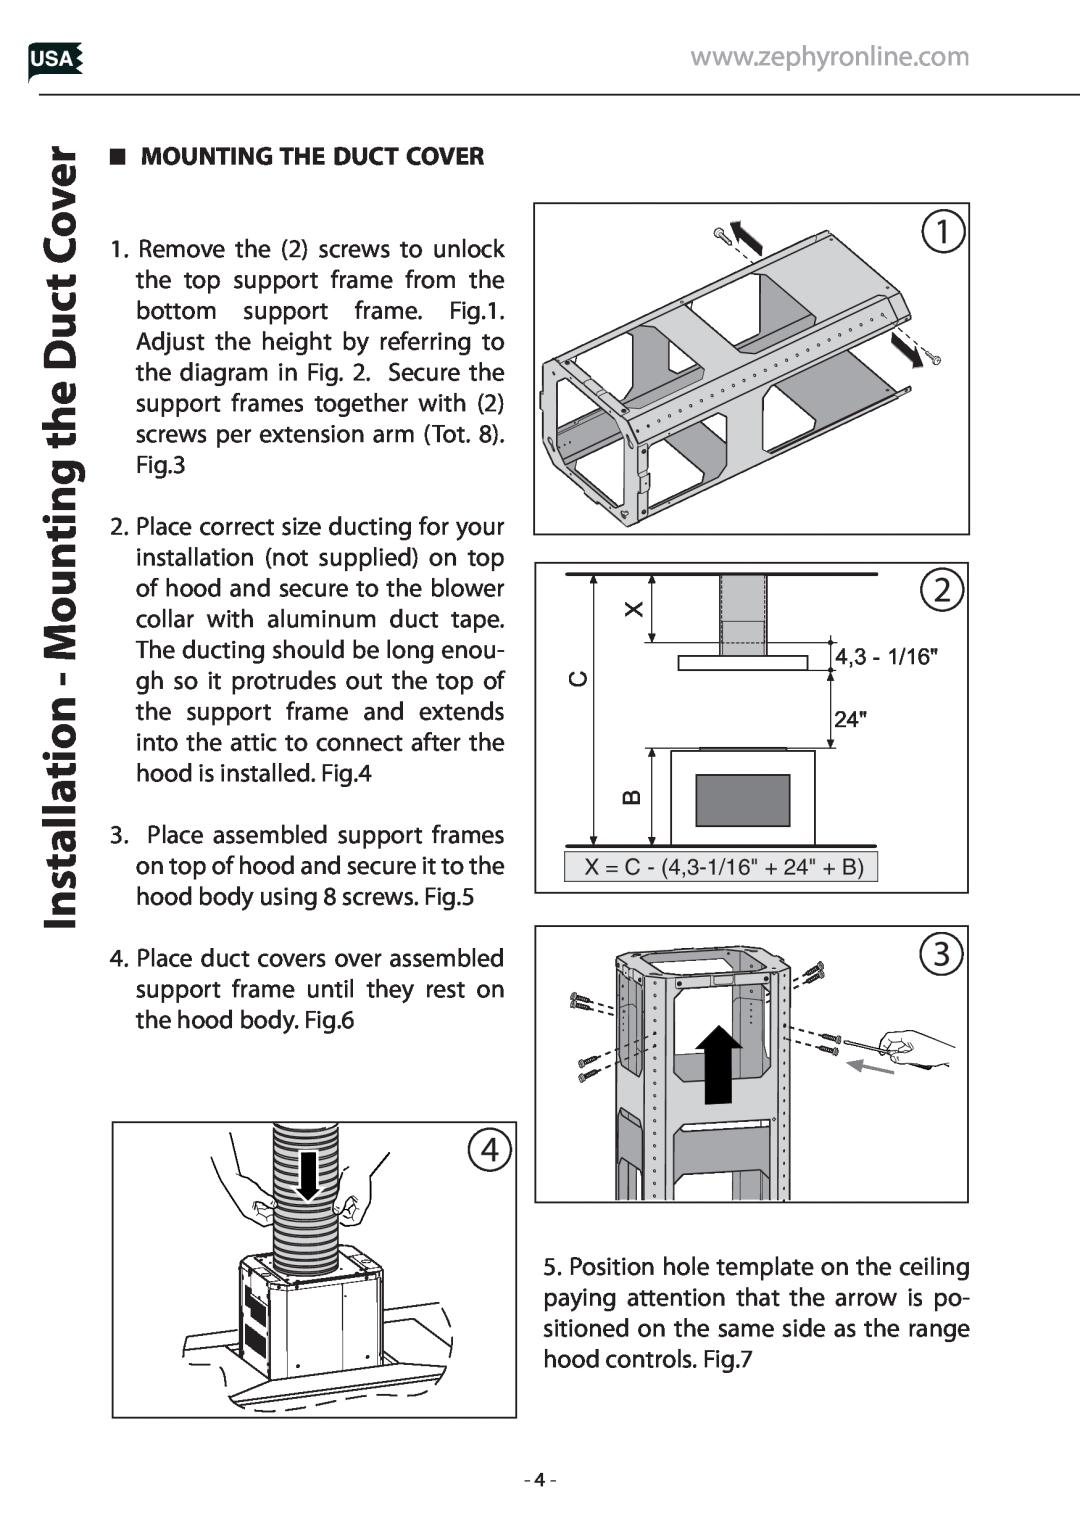 Zephyr Z1C-00LL, Z1C-01LL Installation - Mounting the Duct Cover, Mounting The Duct Cover, Place assembled support frames 